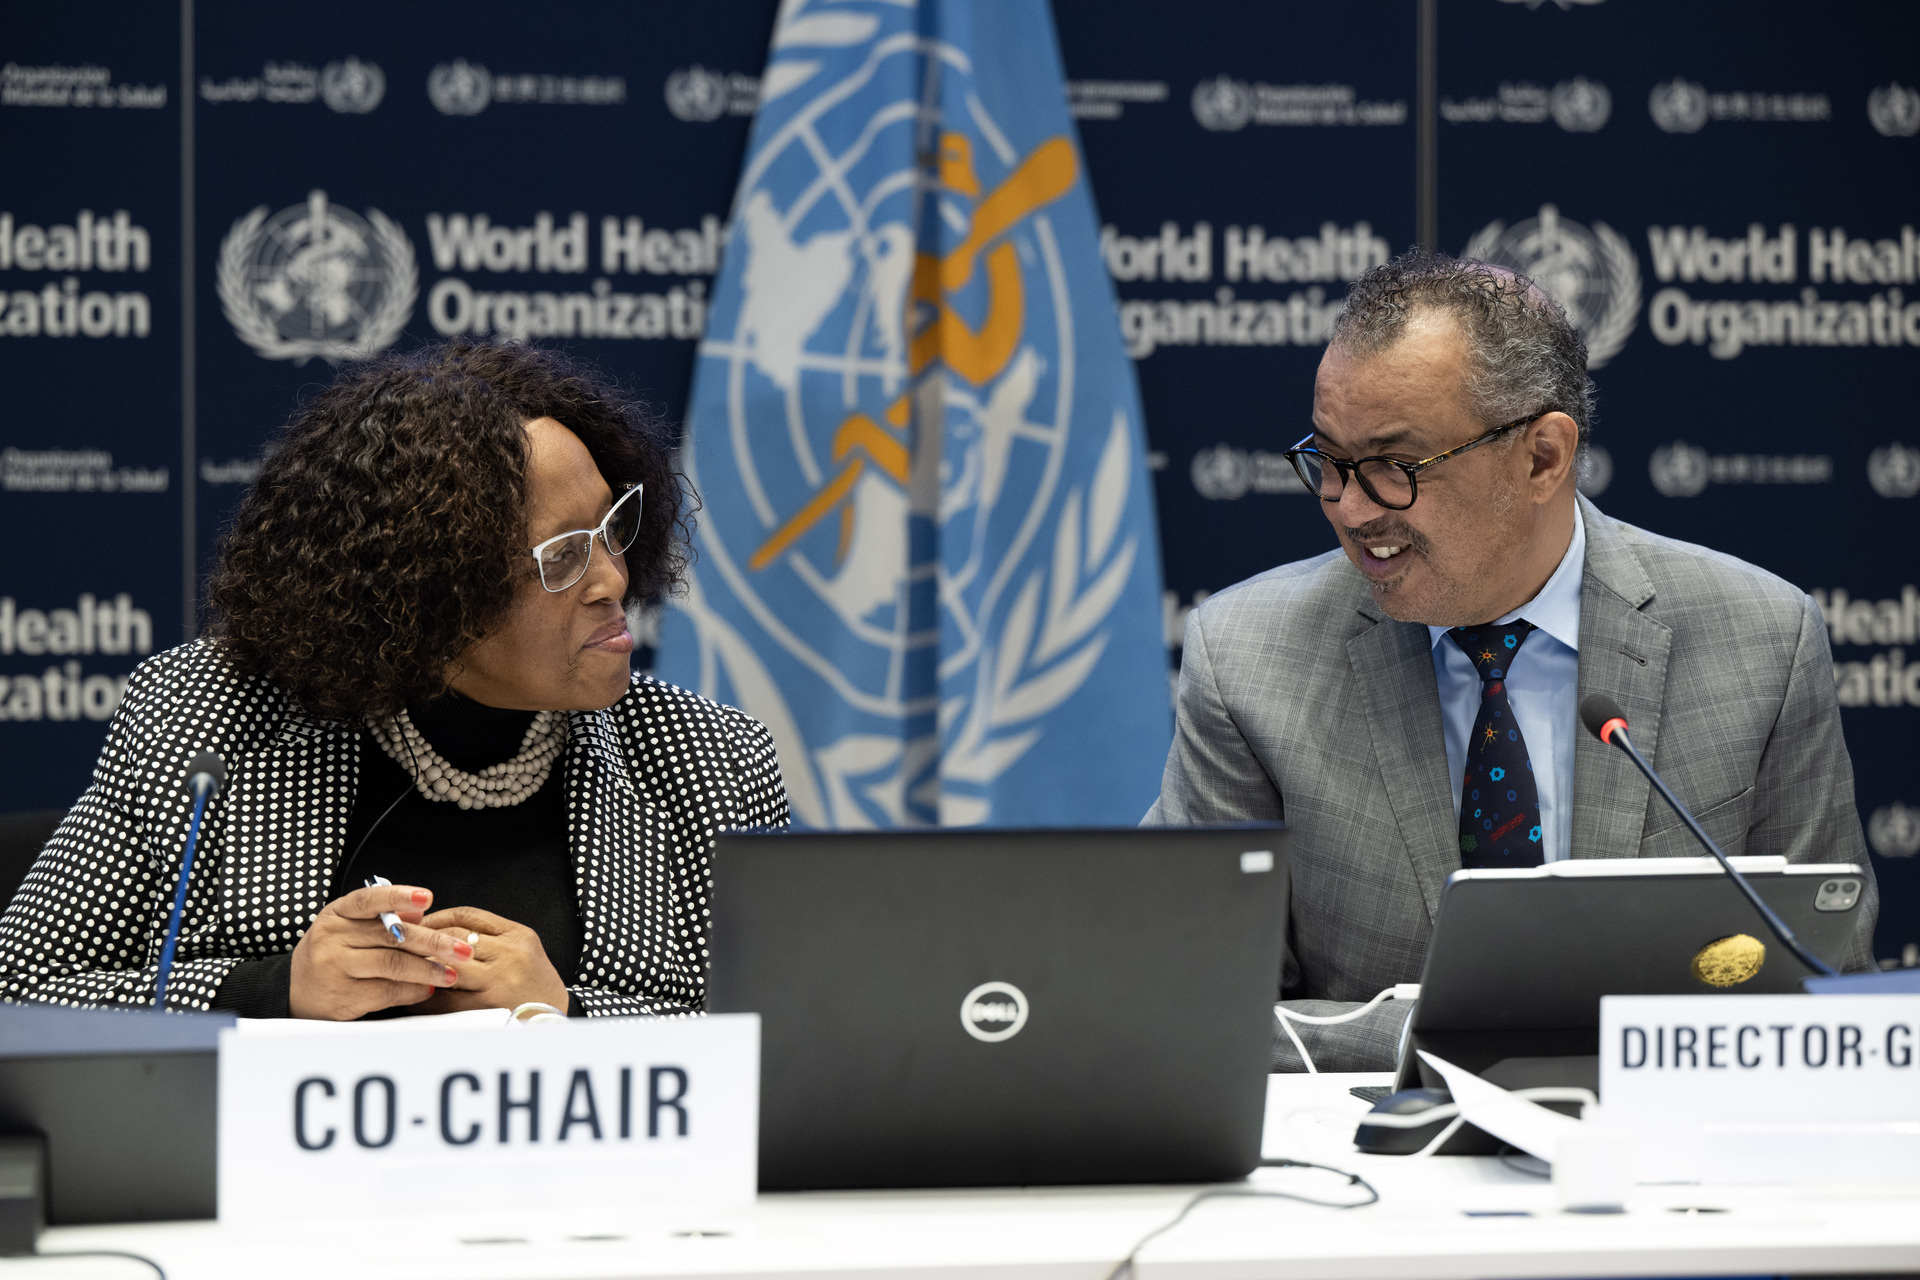 WHO Director-General Dr Tedros Adhanom Ghebreyesus opened the ninth meeting of the Intergovernmental Negotiating Body (INB) for a WHO instrument on pandemic prevention, preparedness and response, which was held in WHO headquarters in Geneva, Switzerland.